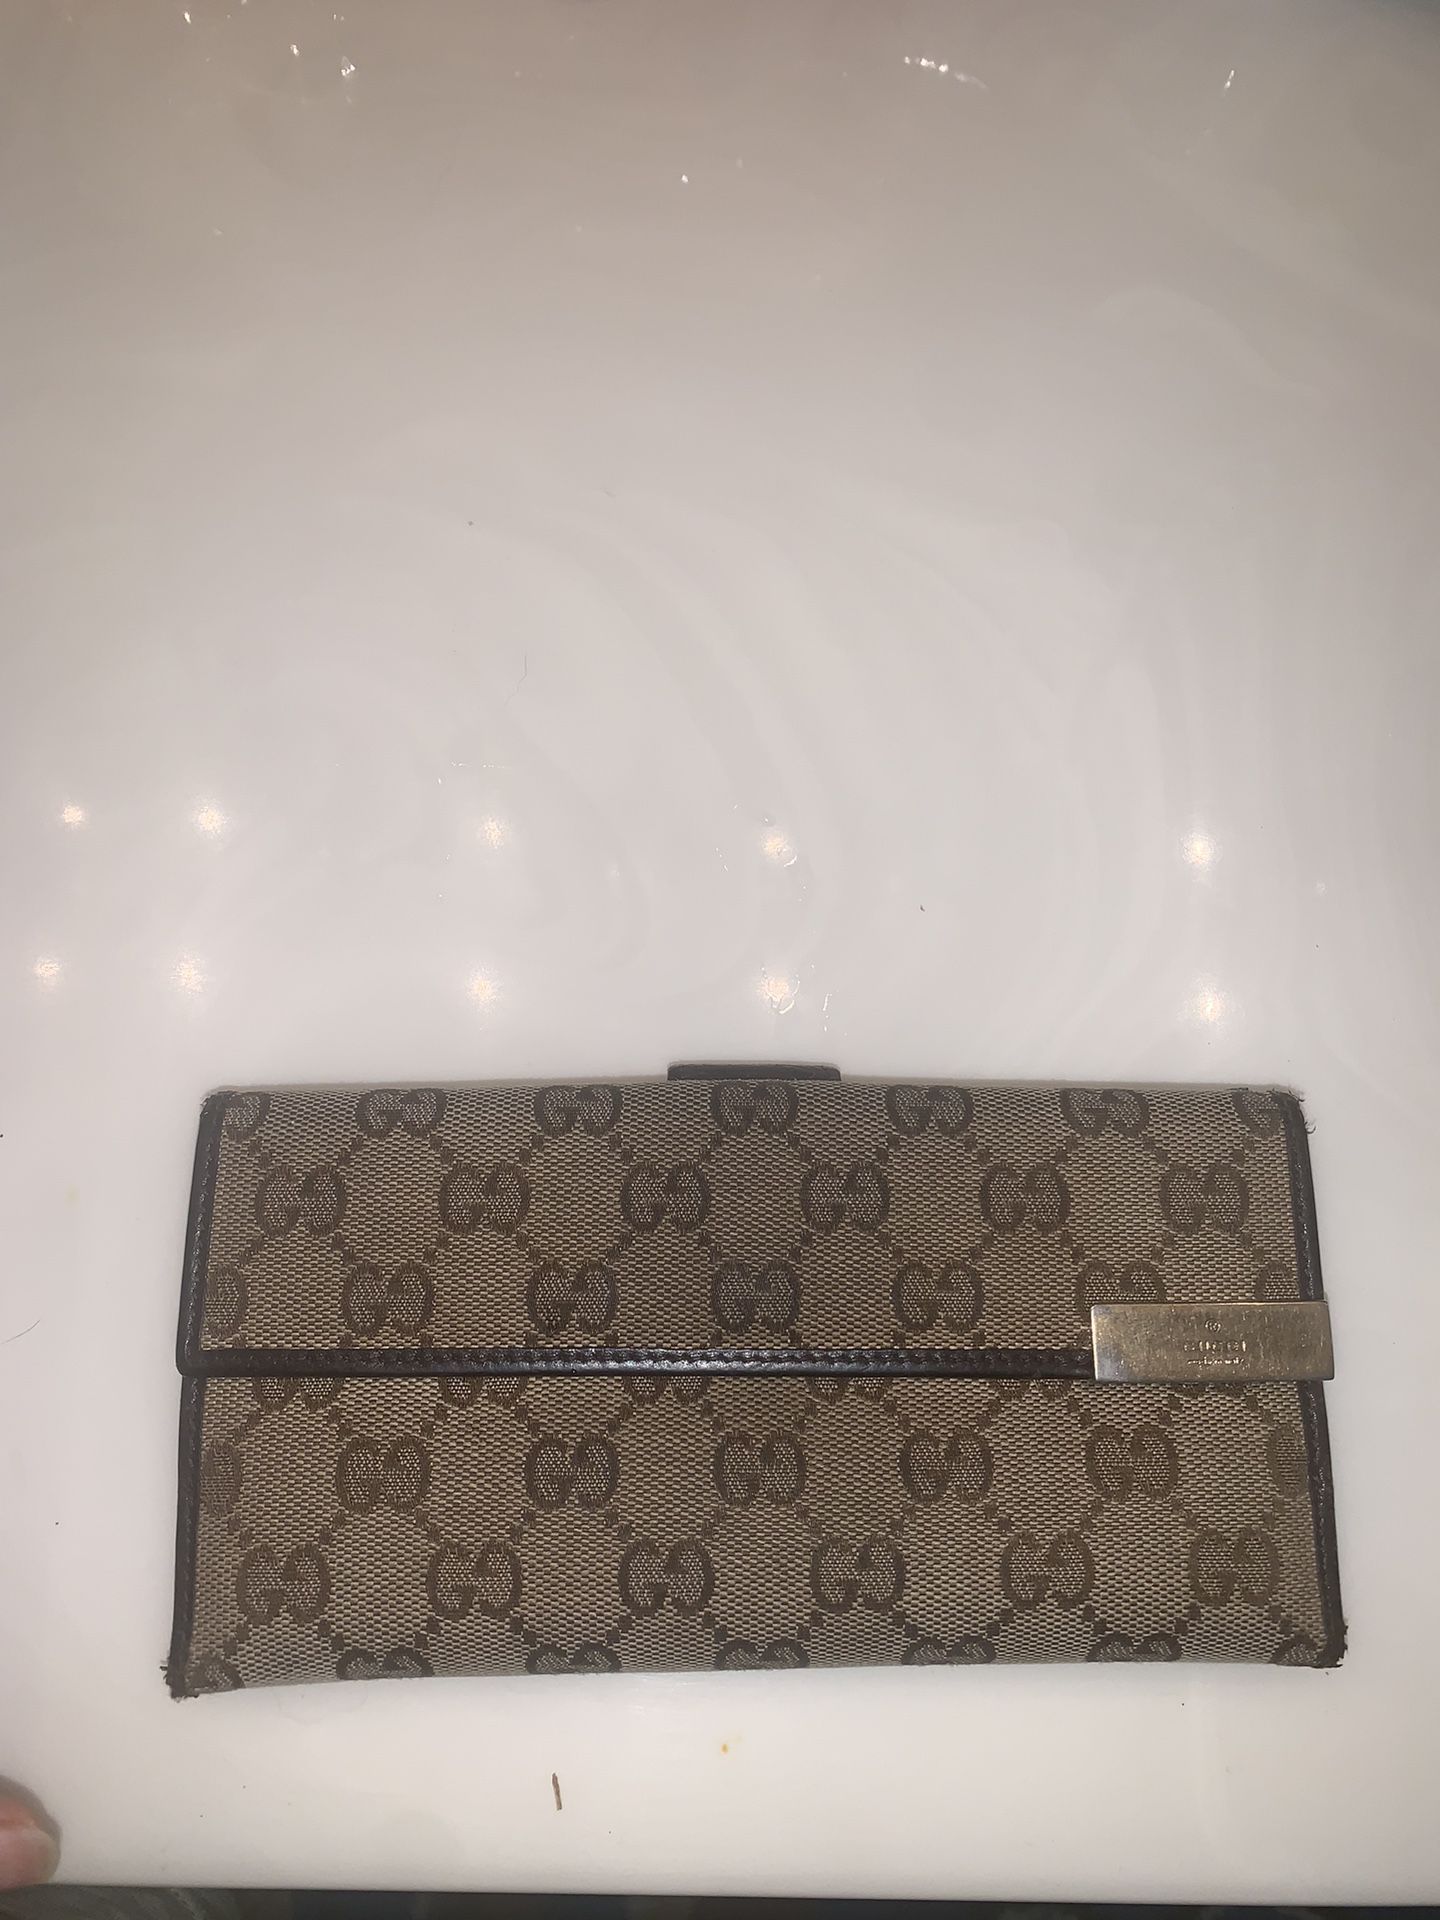 Mens Gucci Wallet Monogram Snake Bi-Fold GG Wallet Authentic for Sale in  Pleasantville, NY - OfferUp